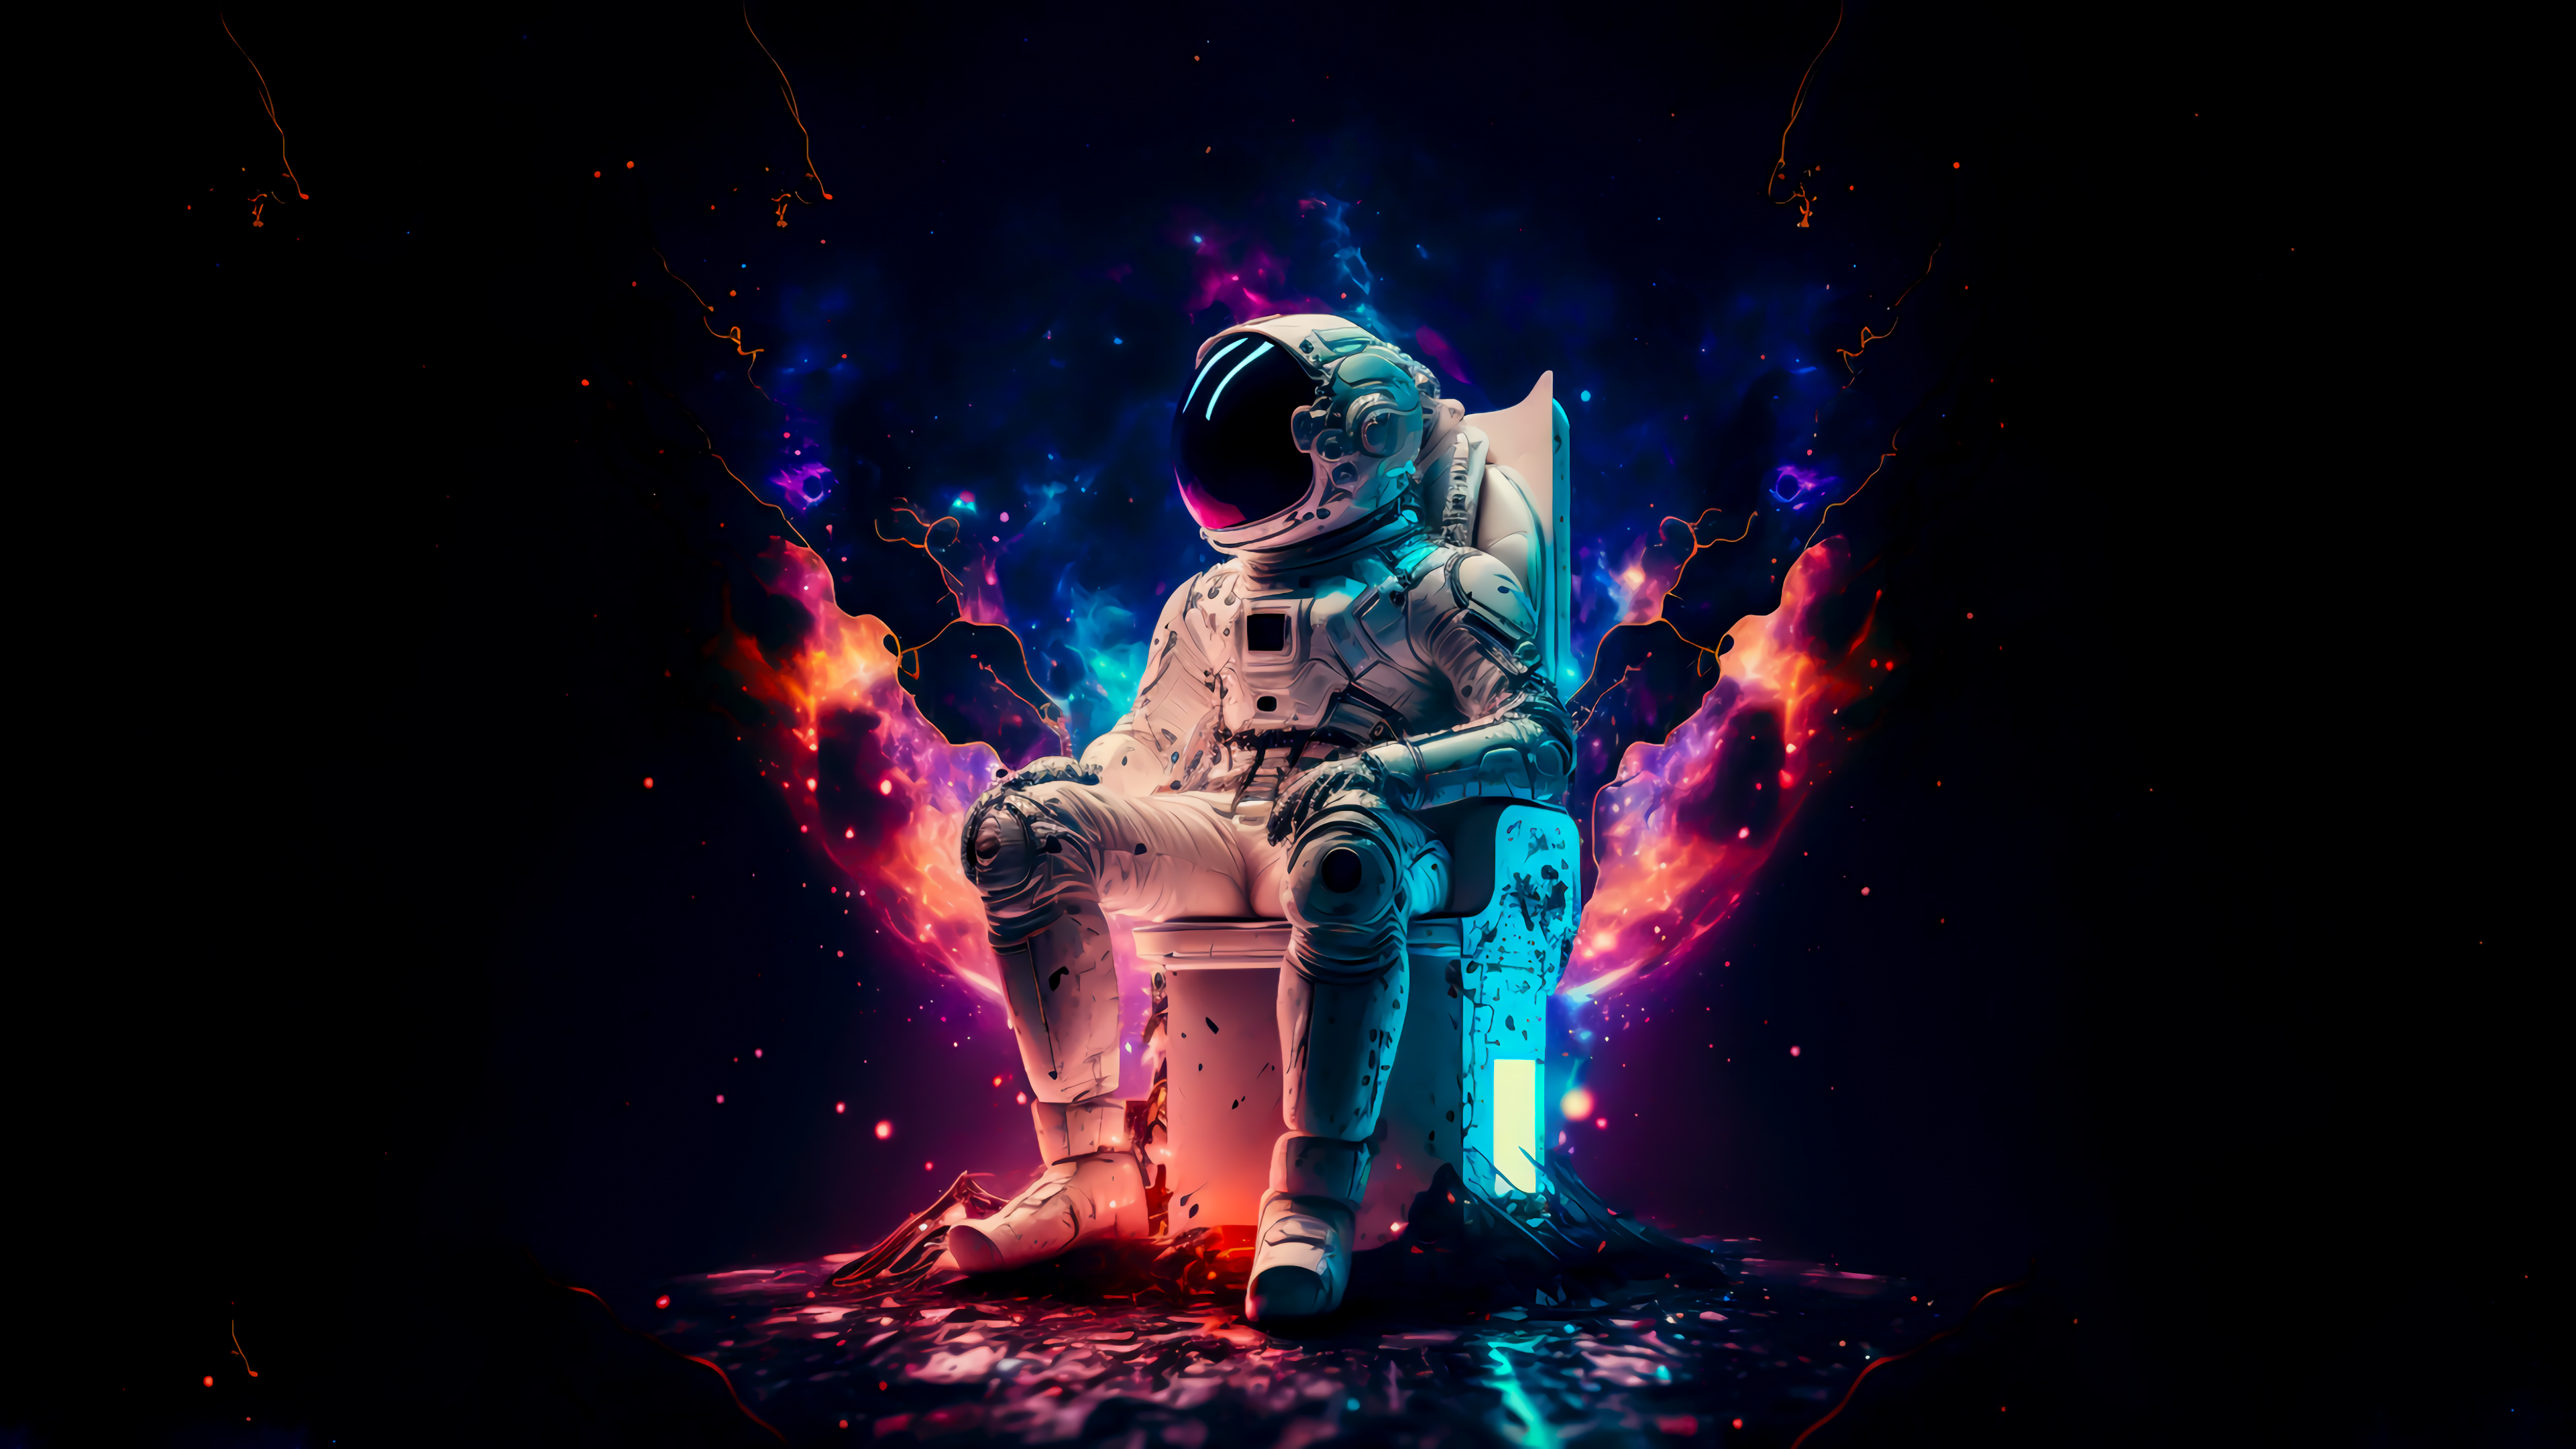 Experience the tranquility of space with this Astronaut 4K background wallpaper